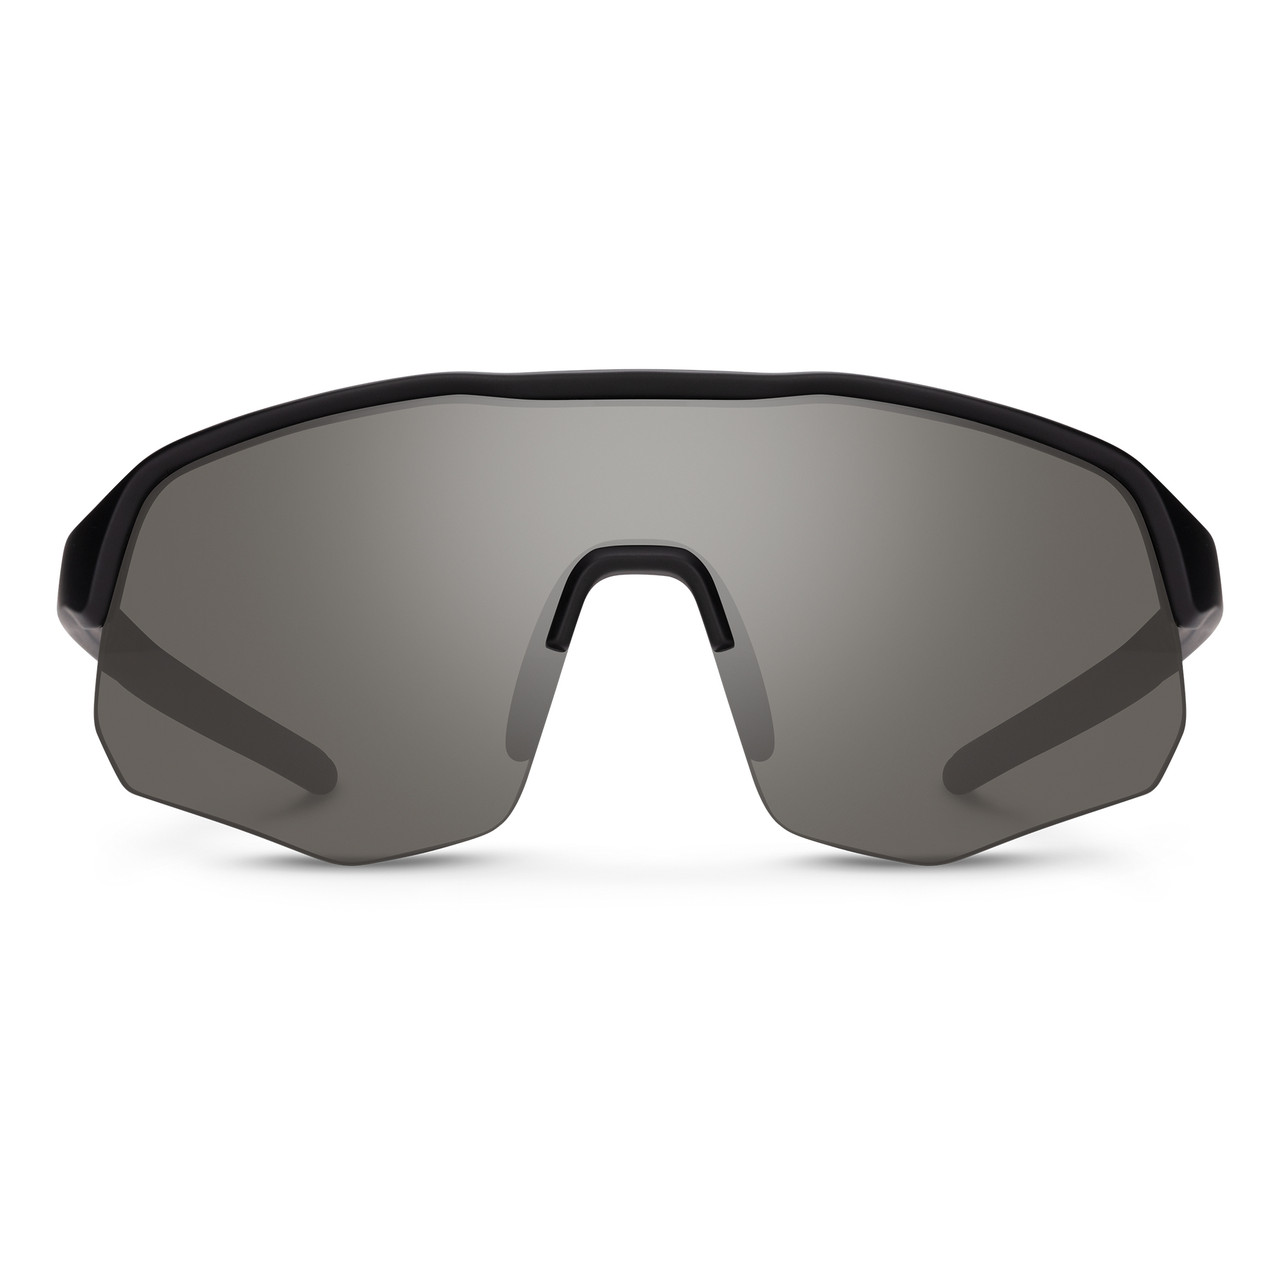 Front View of Suncloud Cadence Pit Viper Style Semi-Rimless Sport Shield Sunglasses in Matte Black with Polar Gray